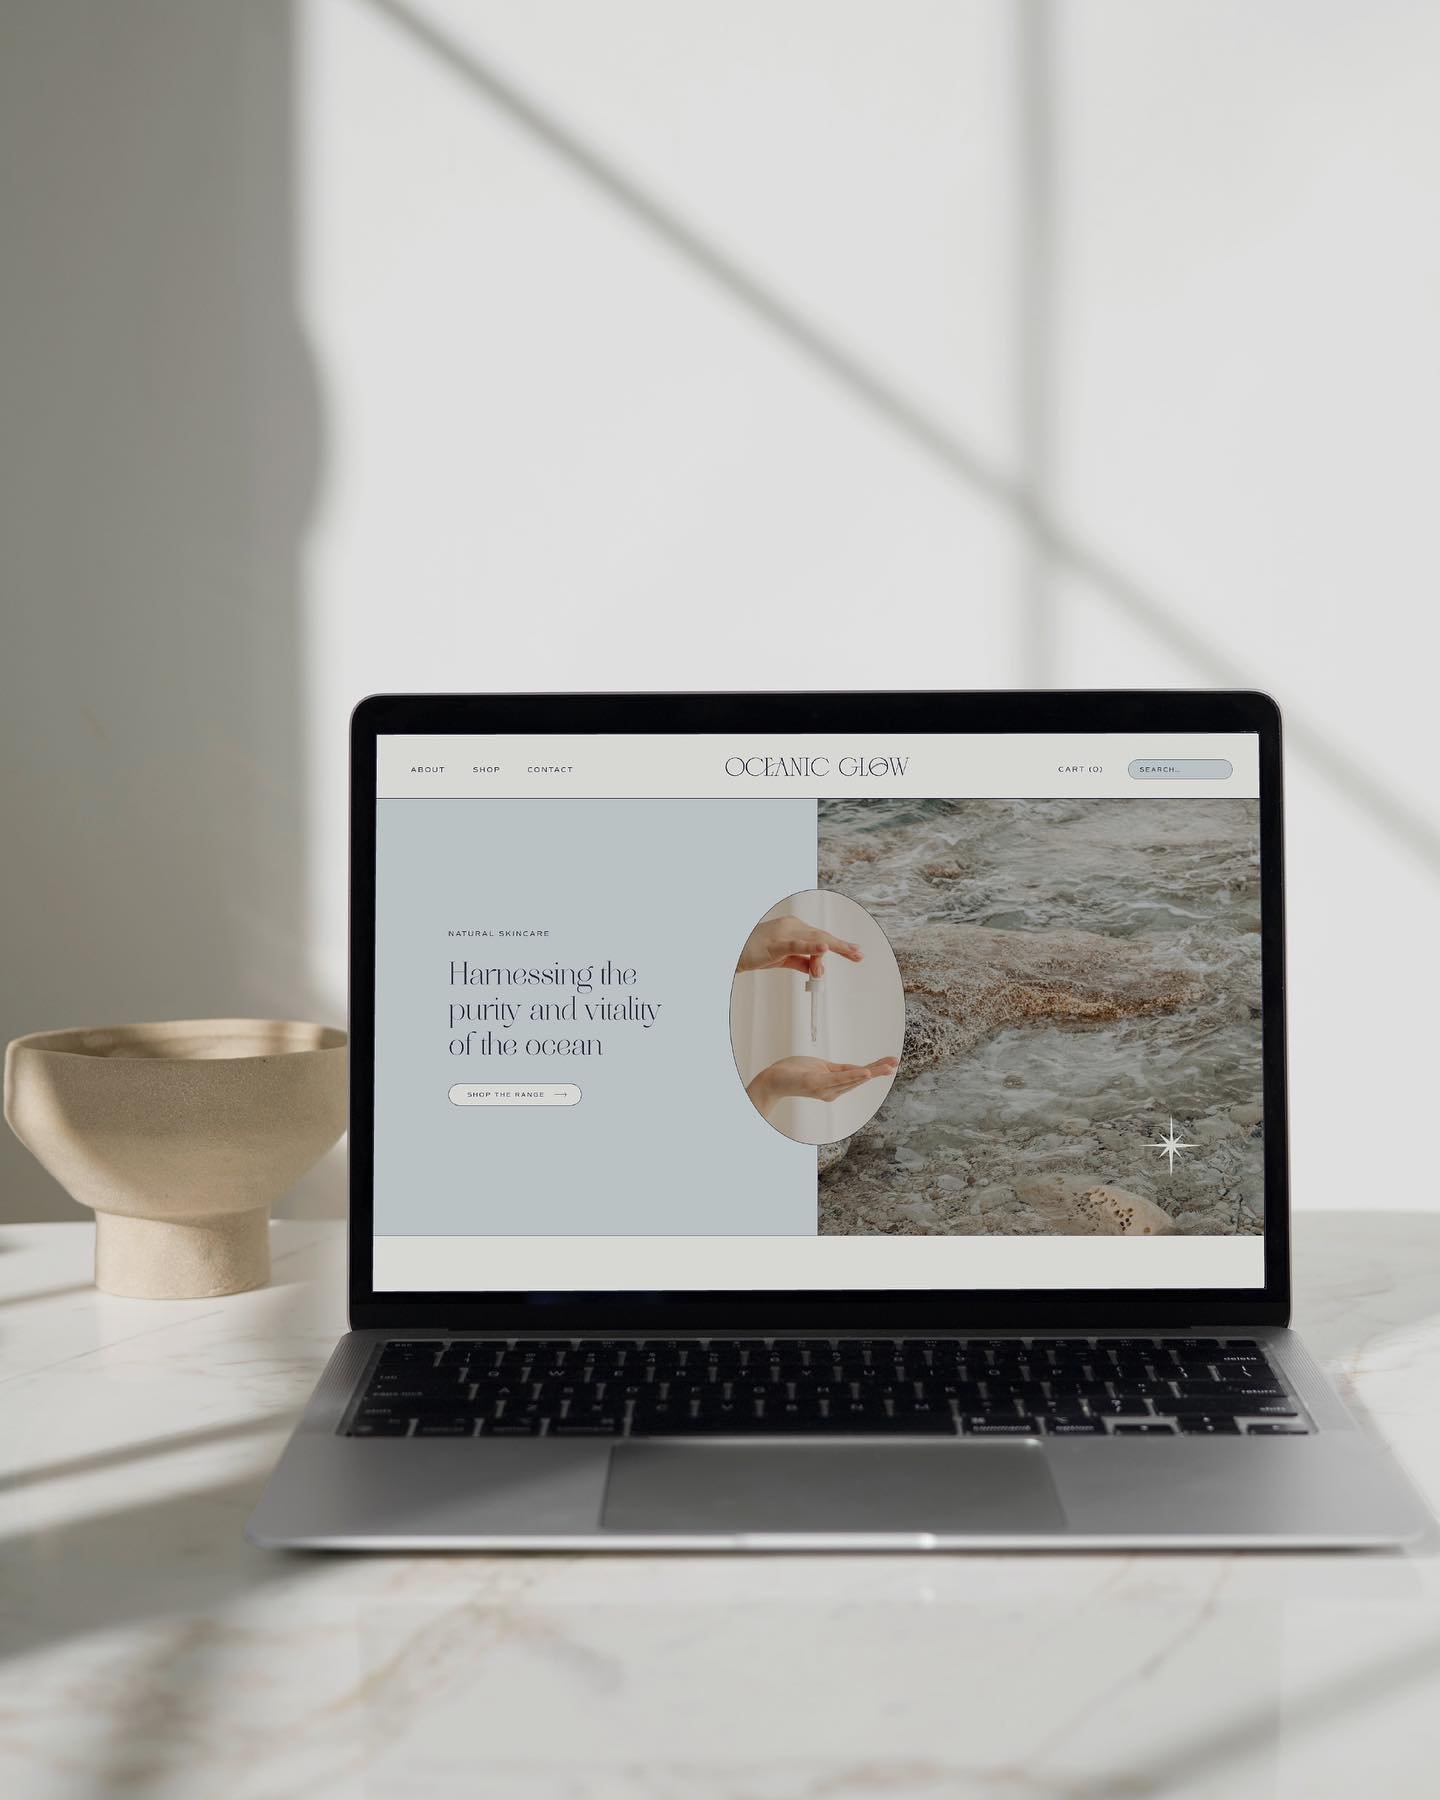 WEBSITE DESIGN - A little peek at the custom website design crafted for Oceanic Glow.⁣
⁣
Every successful brand needs an optimized website that reflects its identity and objectives, fostering credibility, awareness, leads and organic traffic. ⁣
⁣
Rea